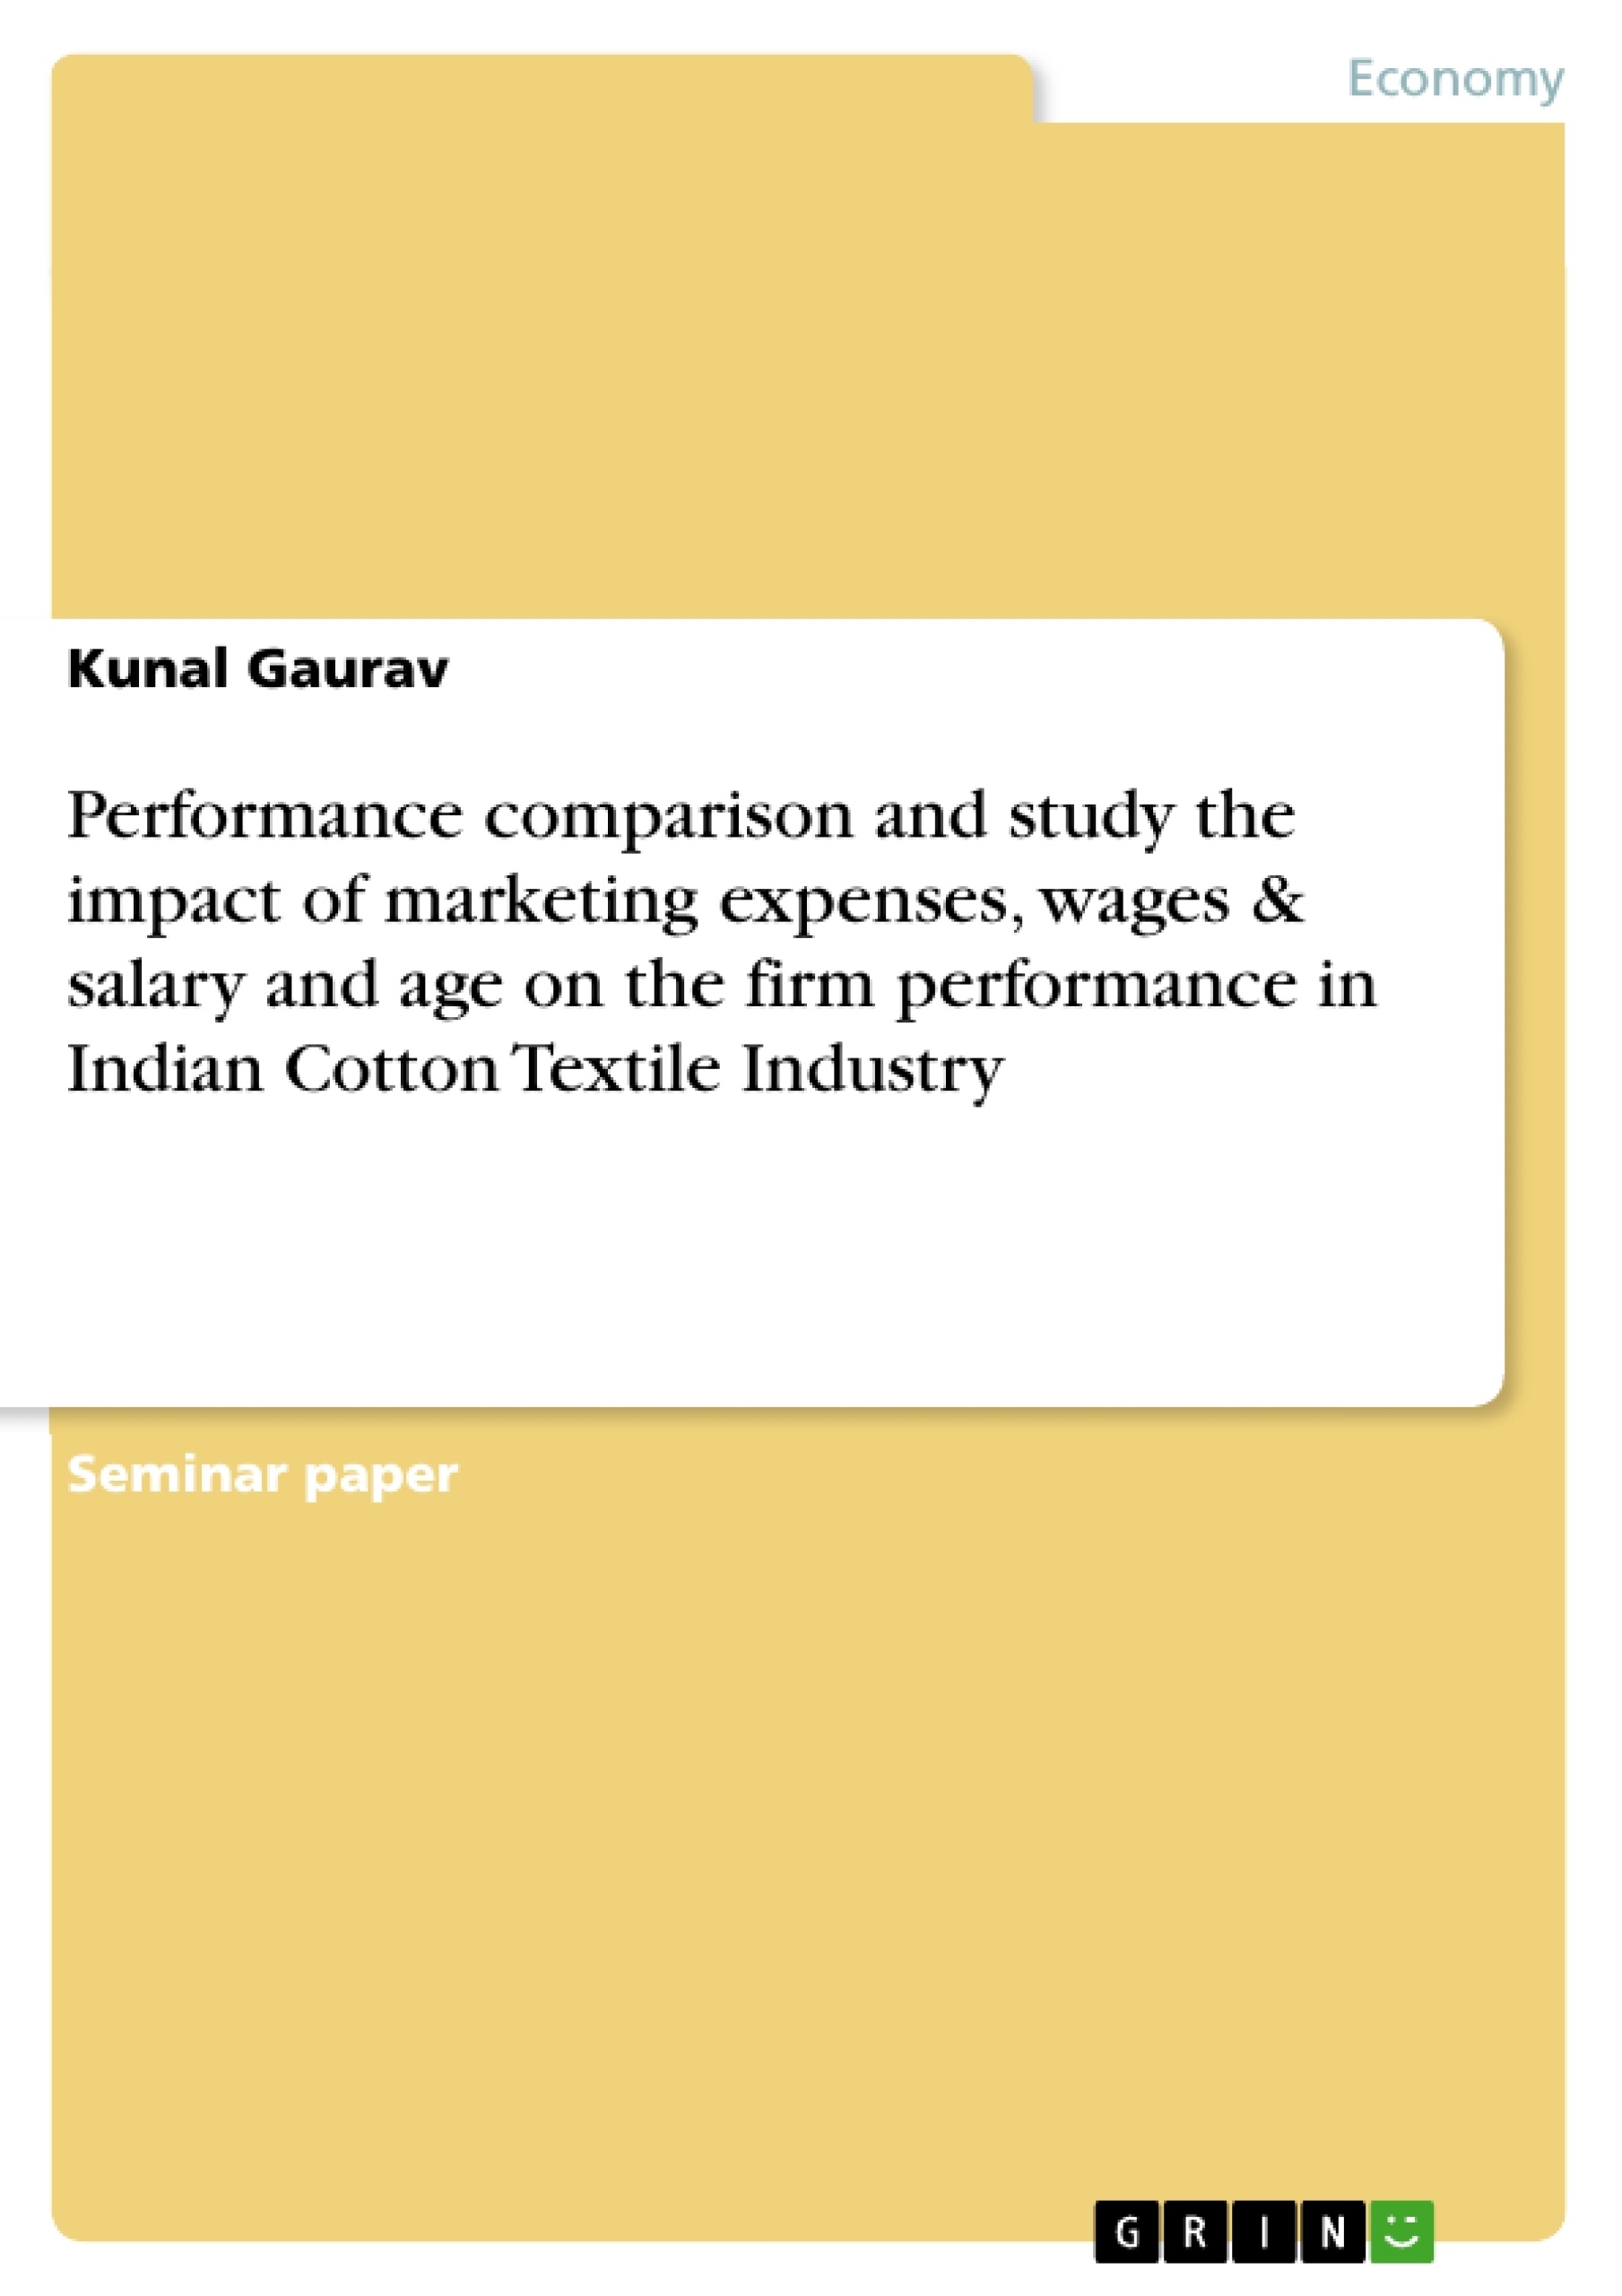 Titel: Performance comparison and study the impact of marketing expenses, wages & salary and age on the firm performance in Indian Cotton Textile Industry